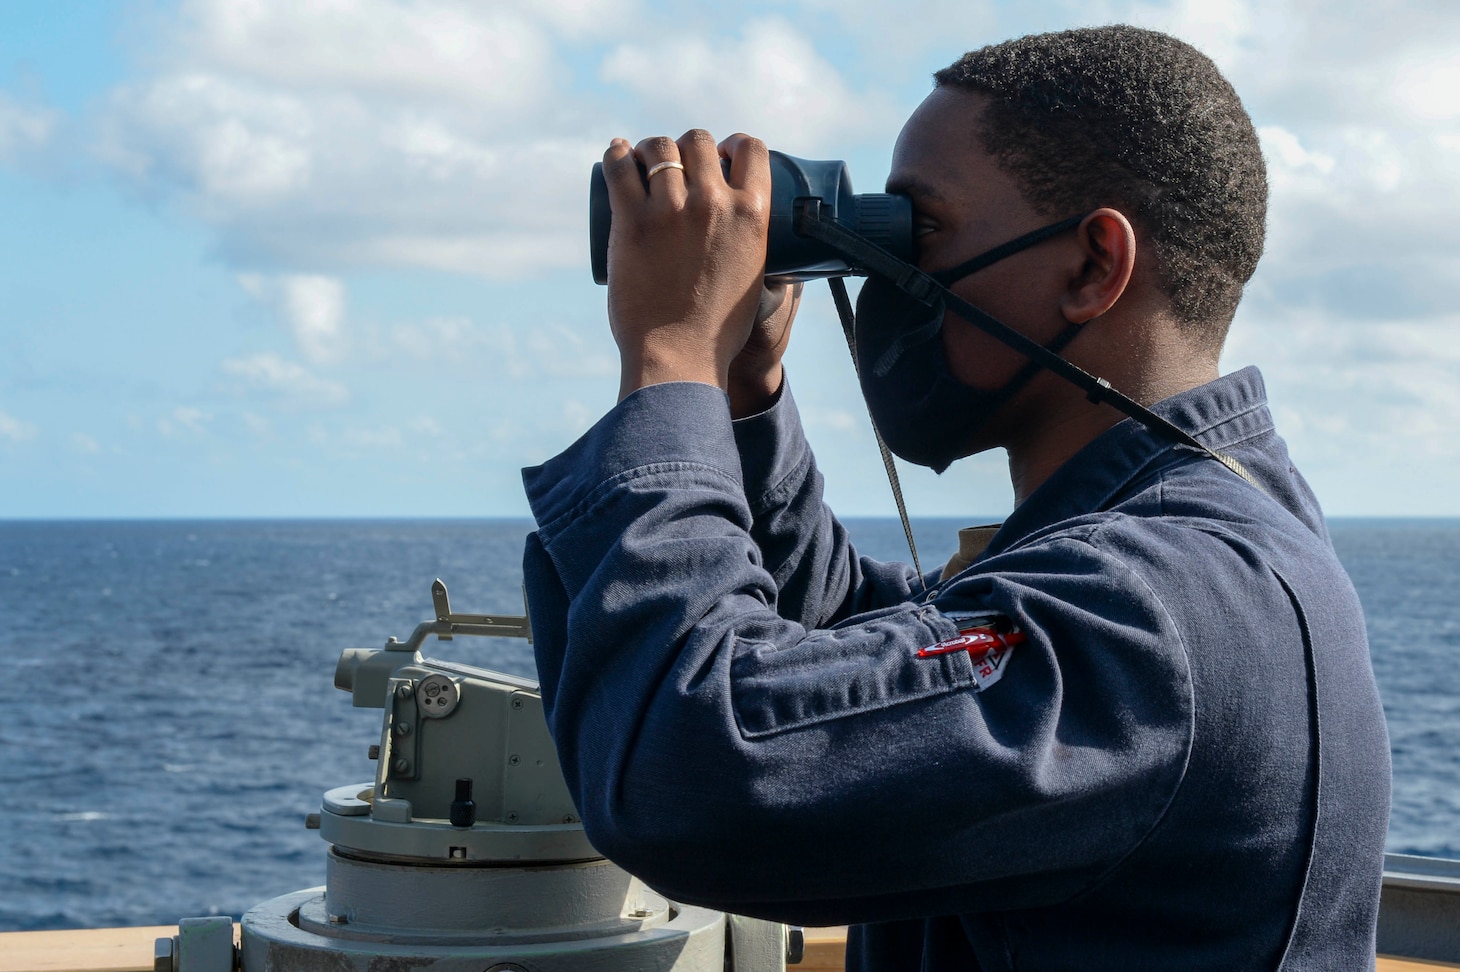 SOUTH CHINA SEA (Feb. 17, 2021) U.S. Navy Ensign Ryan Simpson, from Baltimore, looks through a pair of binoculars on the bridge wing as the guided-missile destroyer USS Russell (DDG 59) conducts routine underway operations. Russell is forward-deployed to the U.S. 7th Fleet area of operations in support of a free and open Indo-Pacific. (U.S. Navy photo by Mass Communication Specialist 3rd Class Wade Costin)